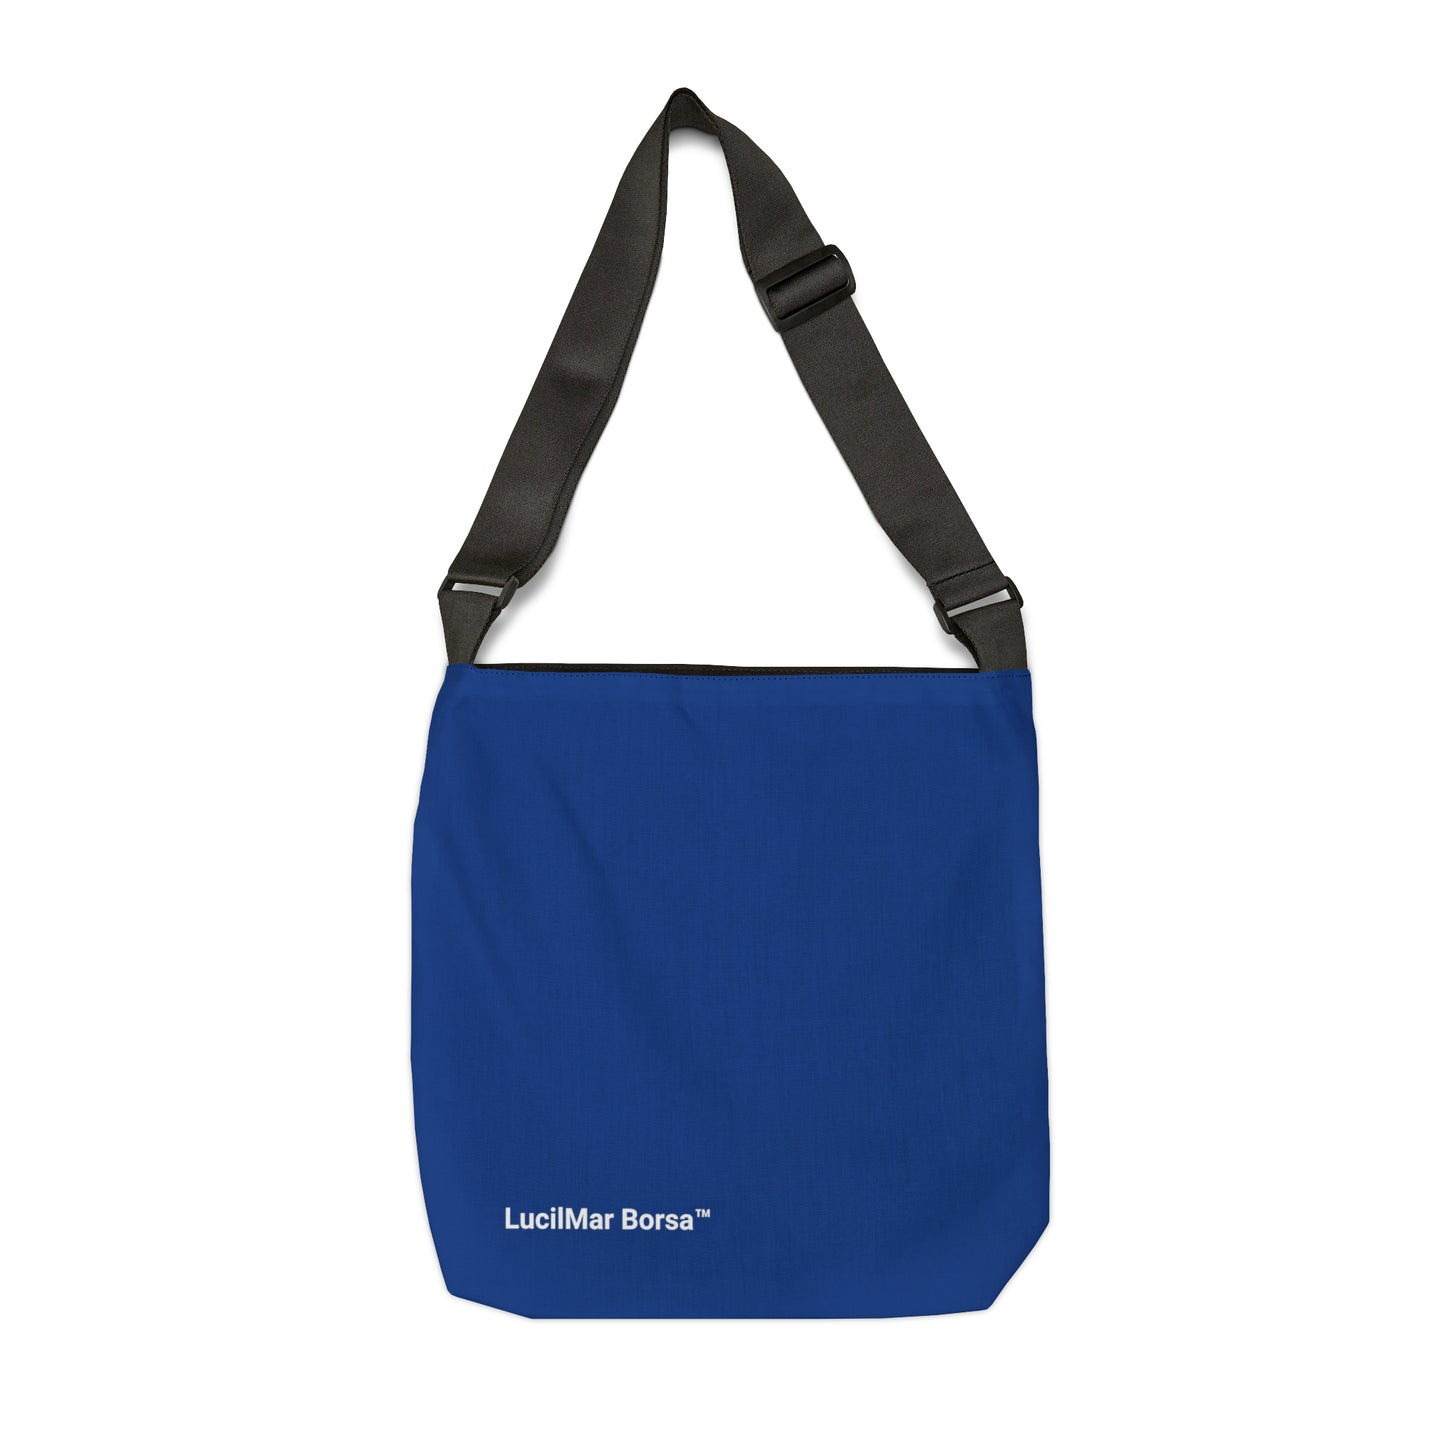 Dark Blue "You Are Loved!" Adjustable Tote Bag--FREE SHIPPING❤️